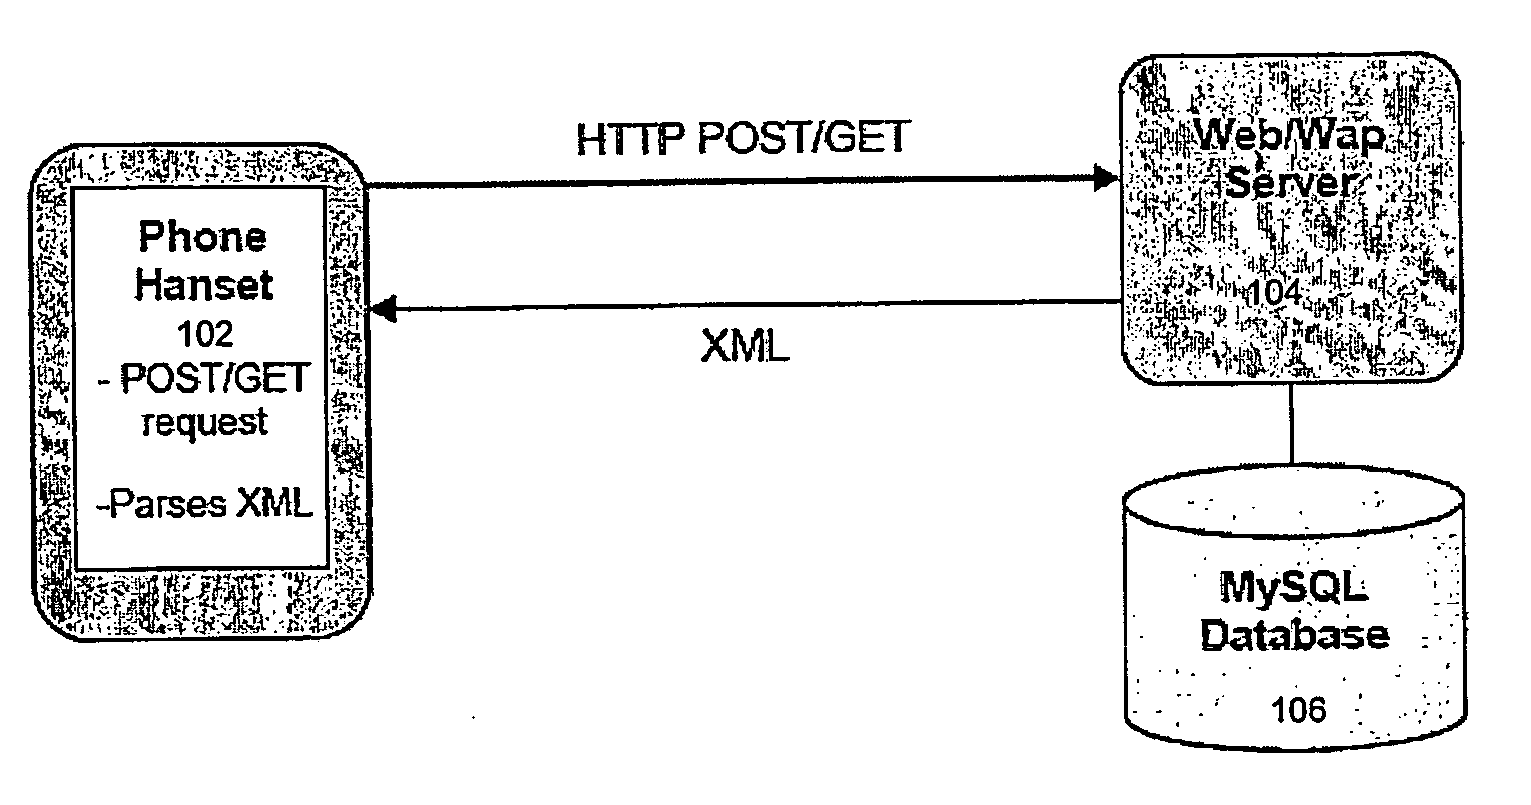 Systems and methods for portable audio synthesis